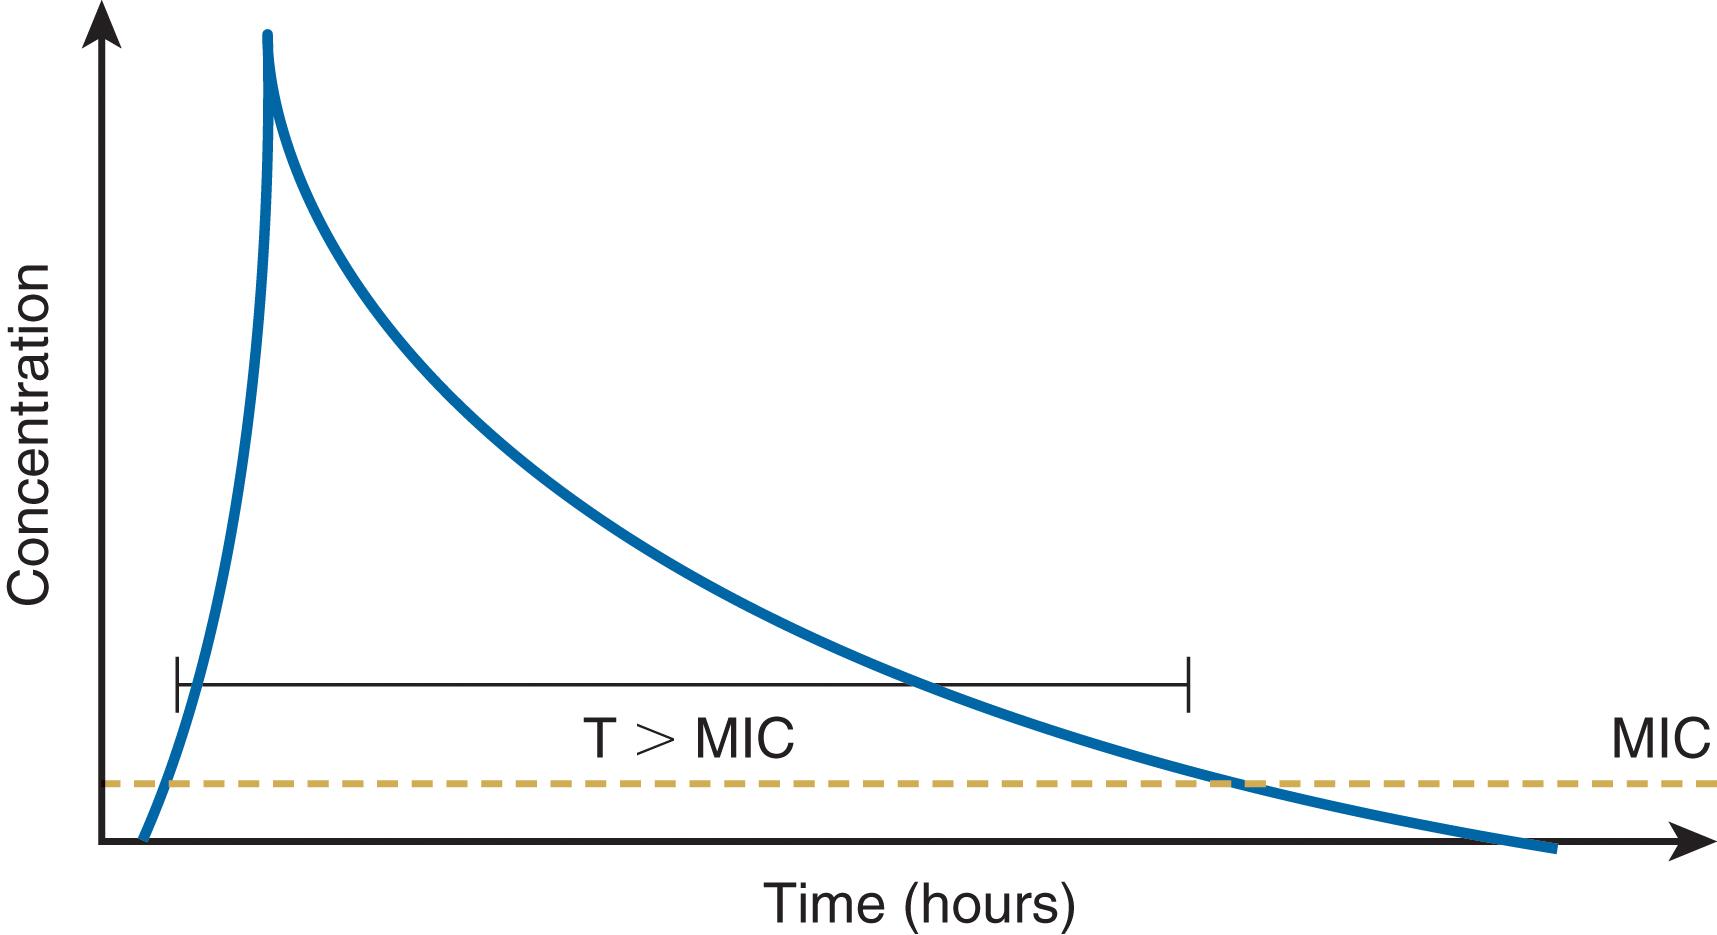 FIGURE 2, An elimination curve is shown for a single bolus dose of a parenteral antibiotic. Some drugs (e.g., aminoglycosides) exhibit concentration-dependent bactericidal activity; a peak concentration:minimum inhibitory concentration (MIC) > 10 is optimal for bacterial killing. β-lactam agents exhibit time-dependent bactericidal activity; the proportion of time above the MIC should be at least 40% for optimal killing. Efficacy of still other drugs (e.g., vancomycin, fluoroquinolones) is reflected by the area under the curve (AUC), a method of measurement of the bioavailability of a drug based on a plot of blood concentrations sampled at frequent intervals. The AUC is directly proportional to the total amount of unaltered drug in the patient’s blood. An AUC:MIC > 125 is associated with optimal antibacterial effect and minimization of the development of resistance. T, Time.